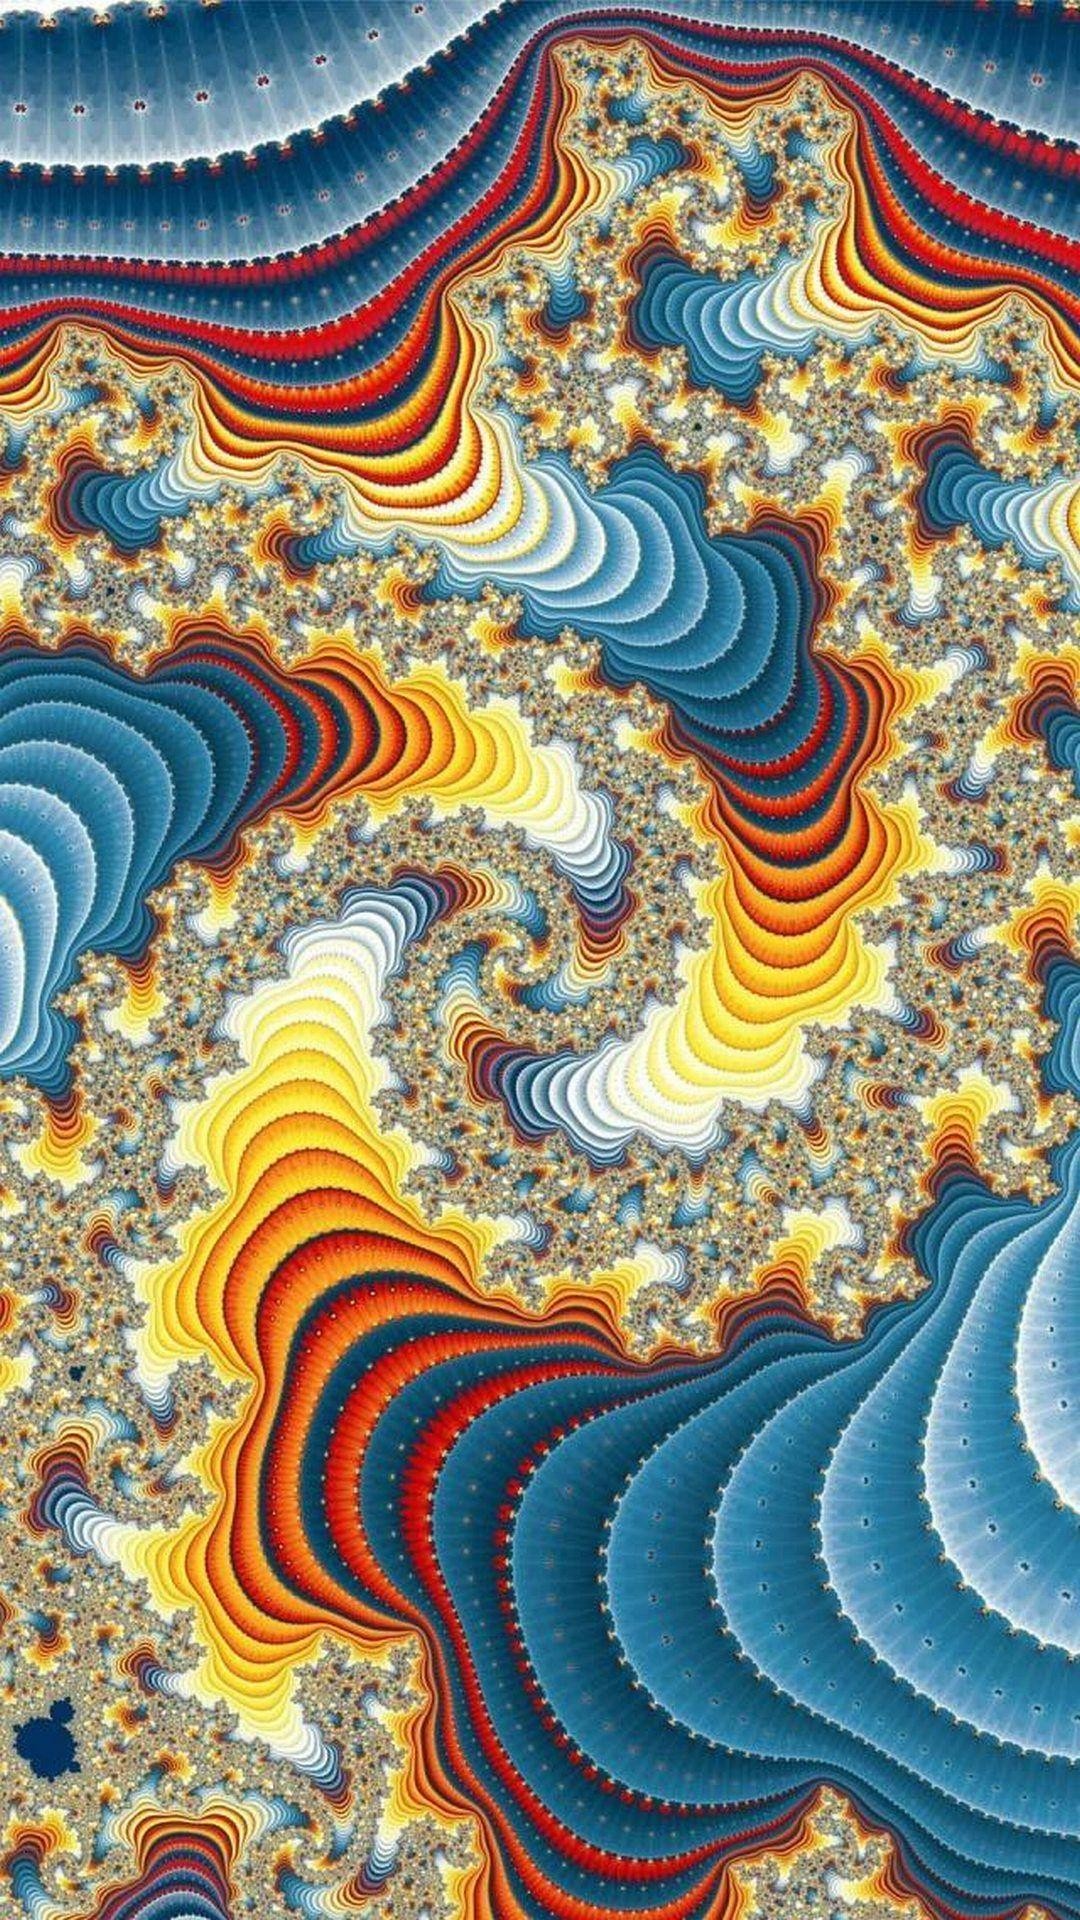 1080x1920 Trippy Wallpapers for Iphone 7, Iphone 7 plus, Iphone 6 plus